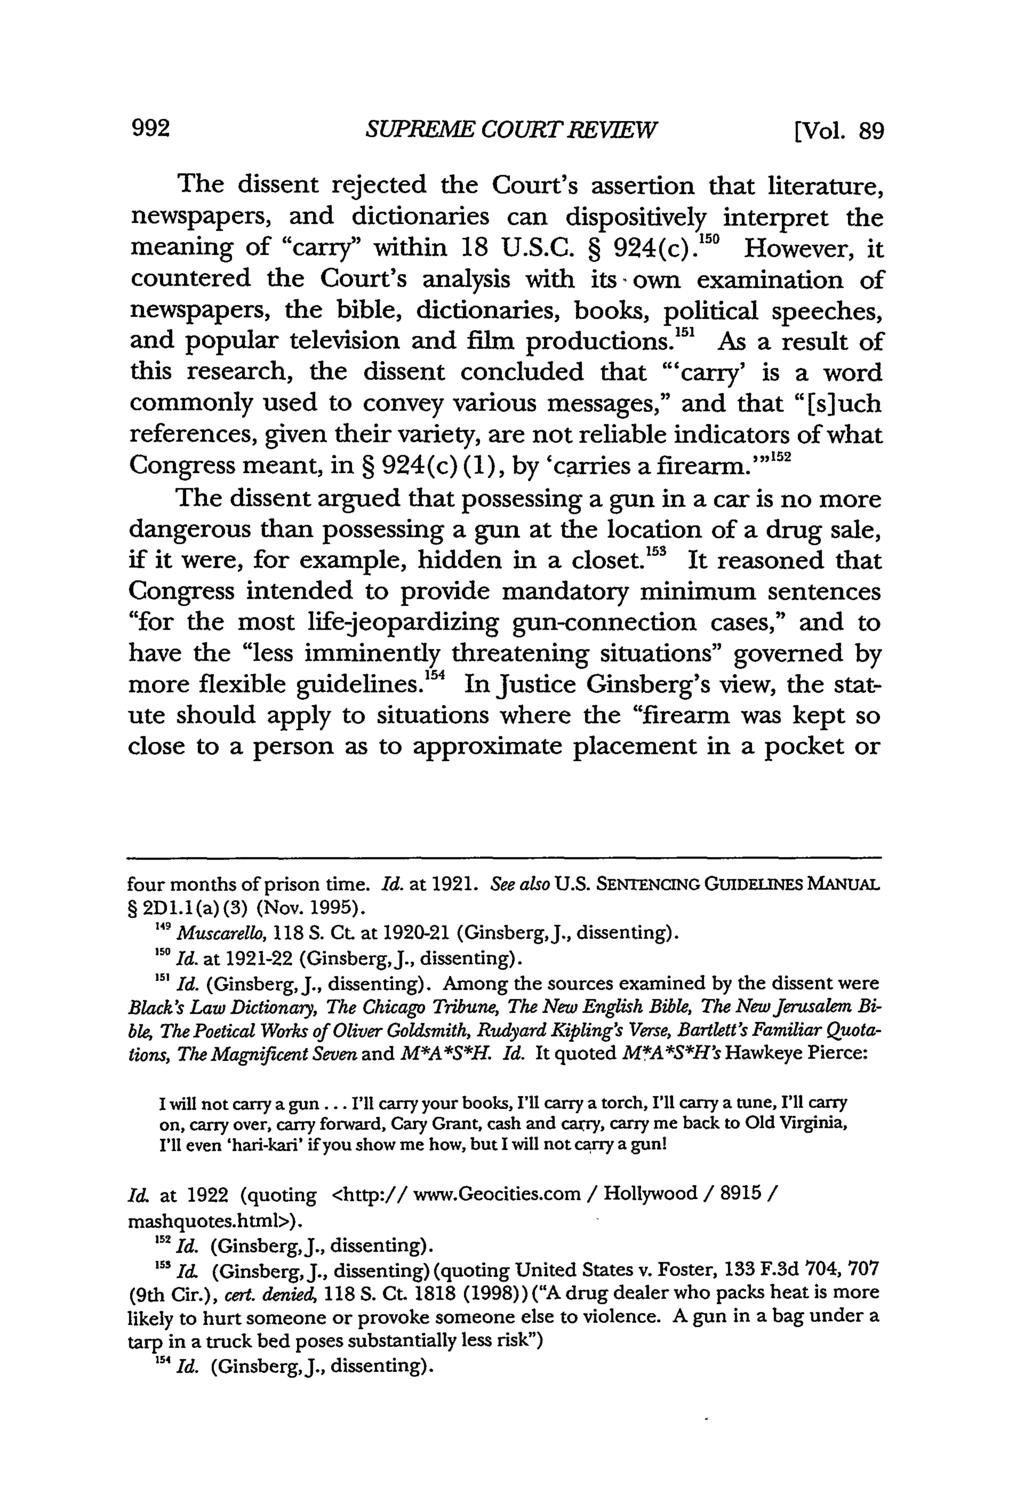 SUPREME COURT REVIEW [Vol. 89 The dissent rejected the Court's assertion that literature, newspapers, and dictionaries can dispositively interpret the meaning of "carry" within 18 U.S.C. 924(c).